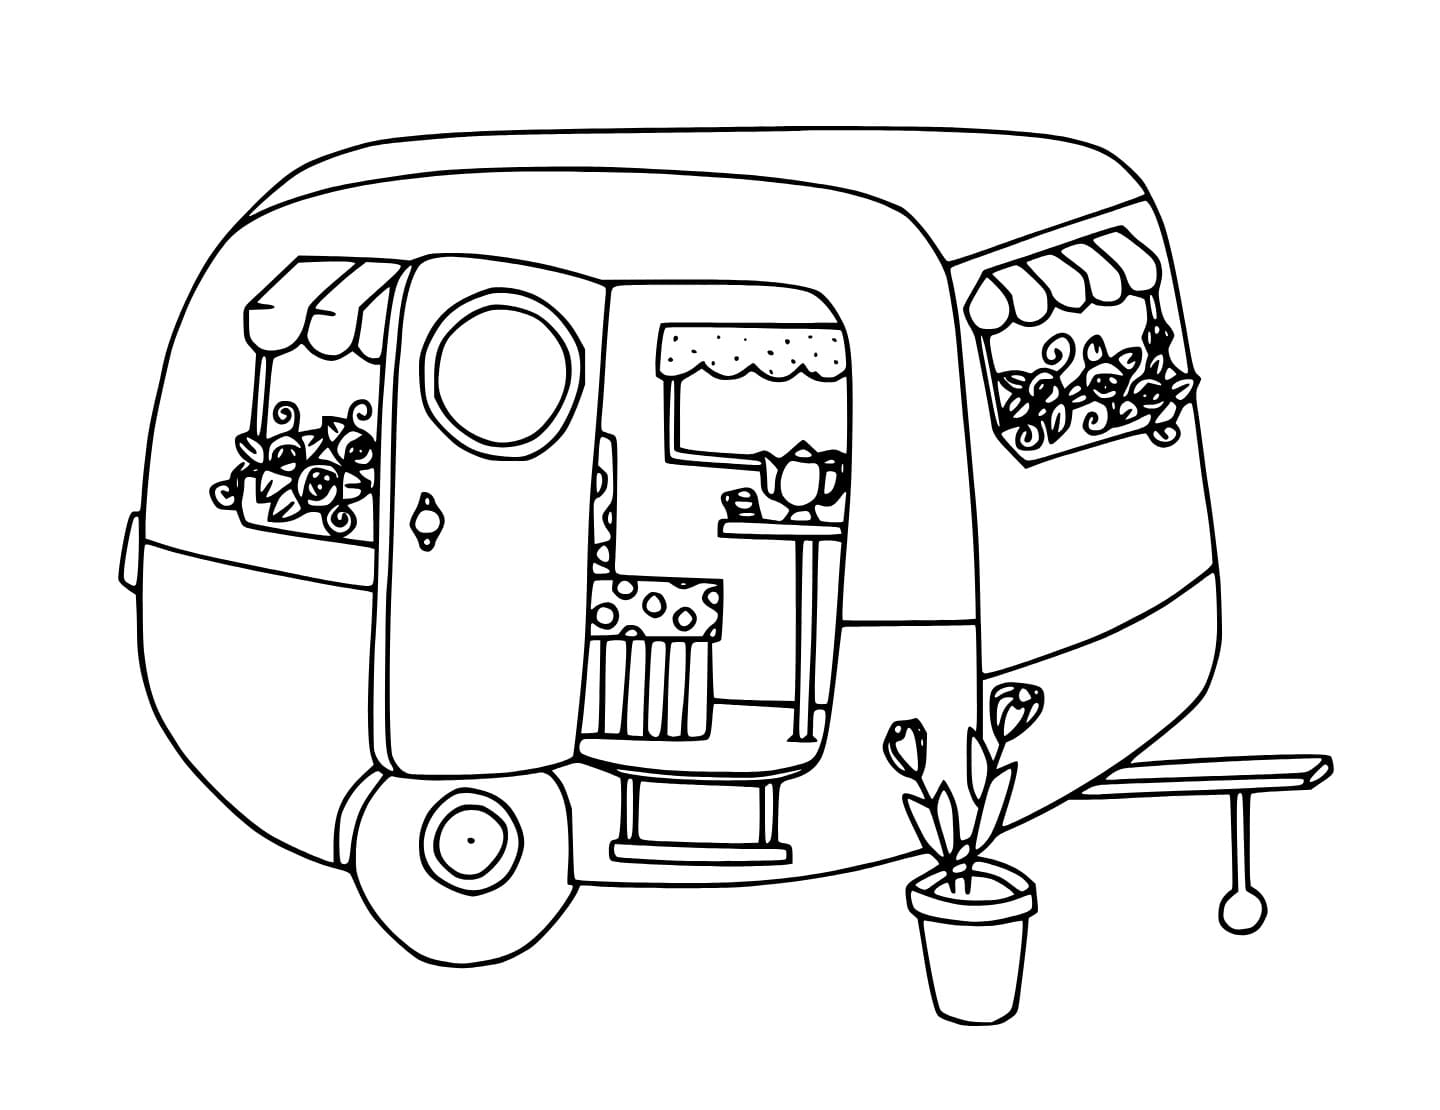 Cute Caravan coloring page - Download, Print or Color Online for Free